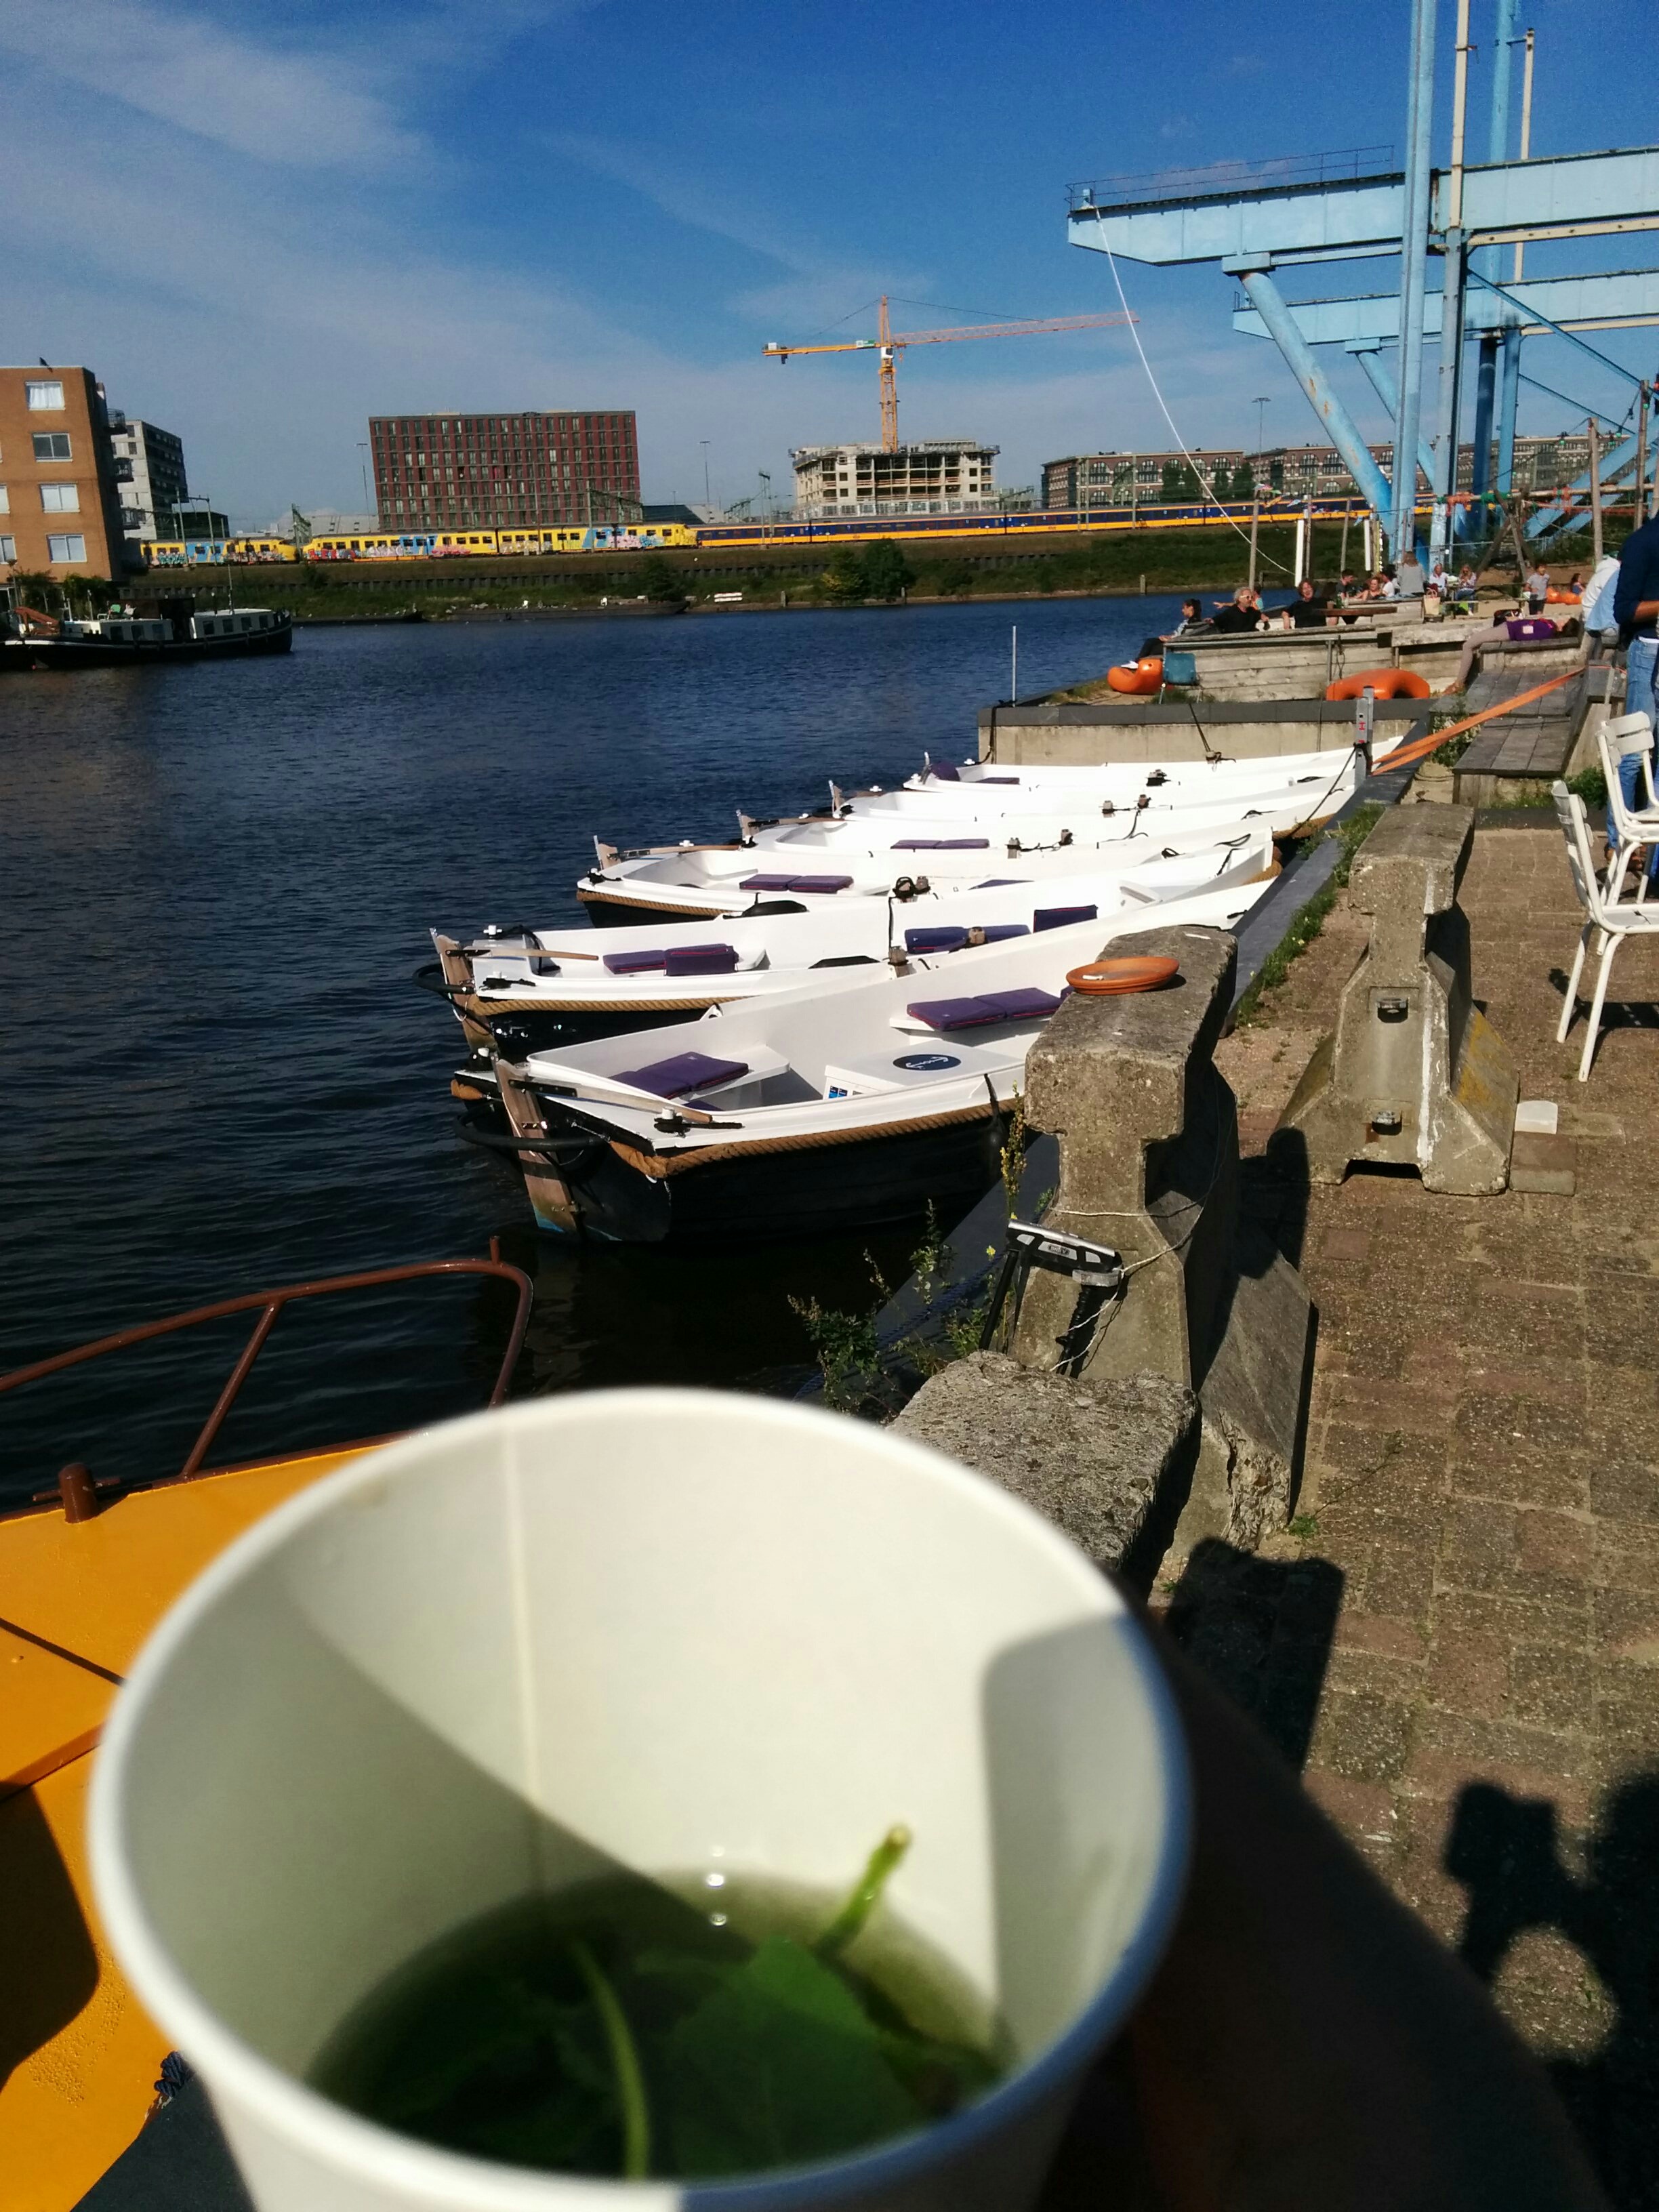 View on a canal in Amsterdam over some fresh mint tea